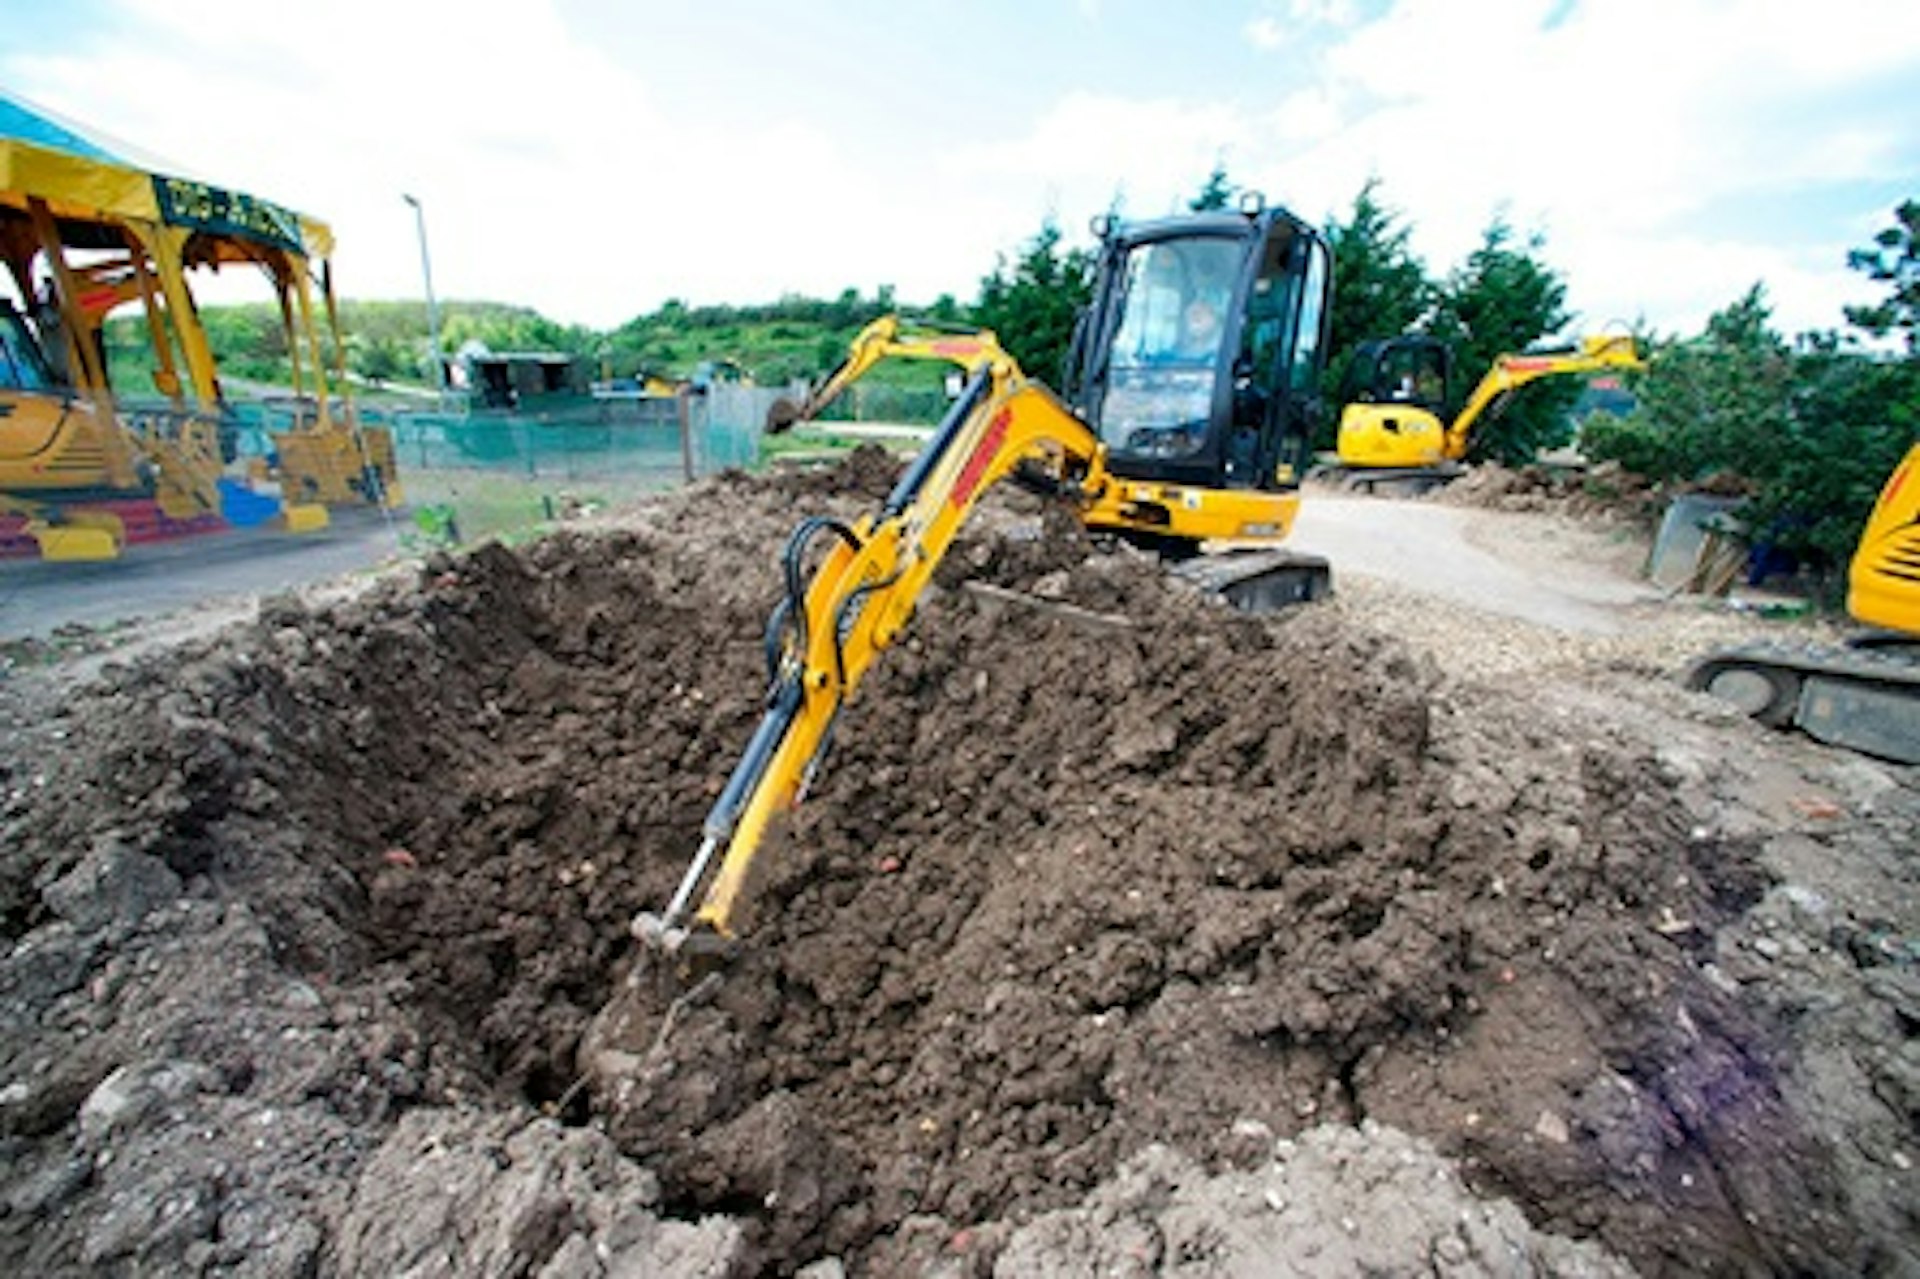 Diggerland Admission for One 1